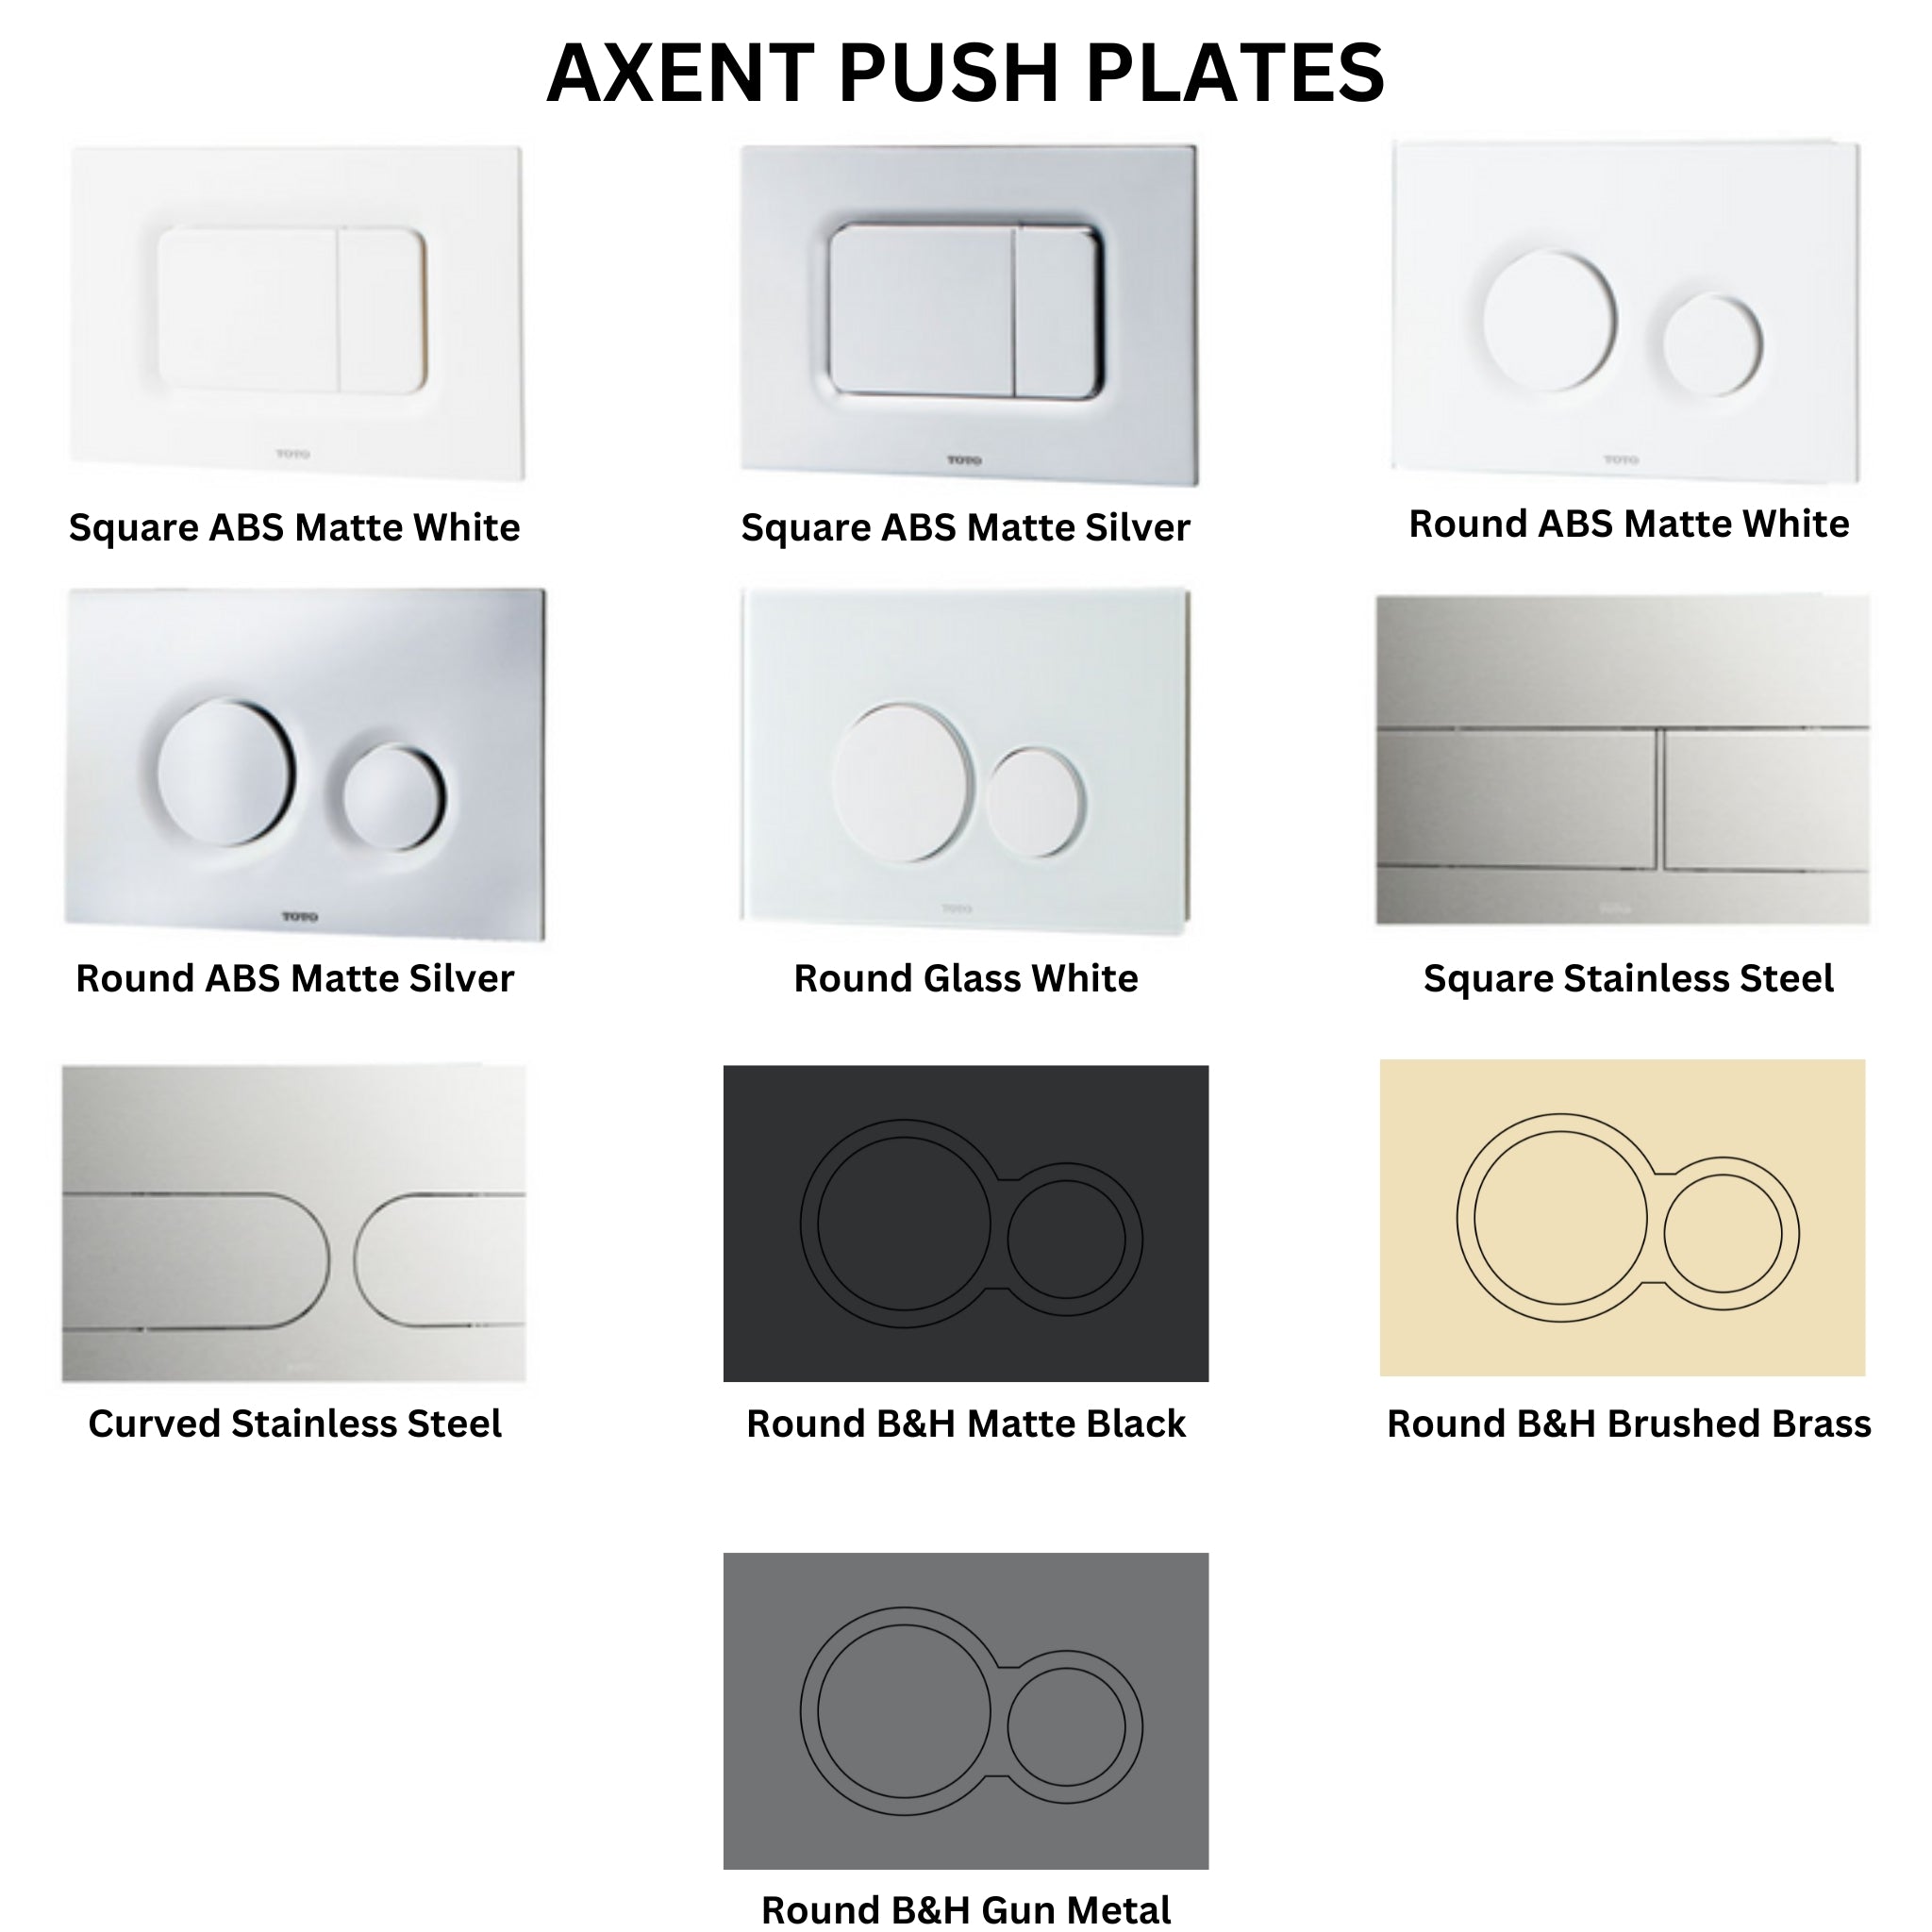 AXENT WALL FACED CISTERN